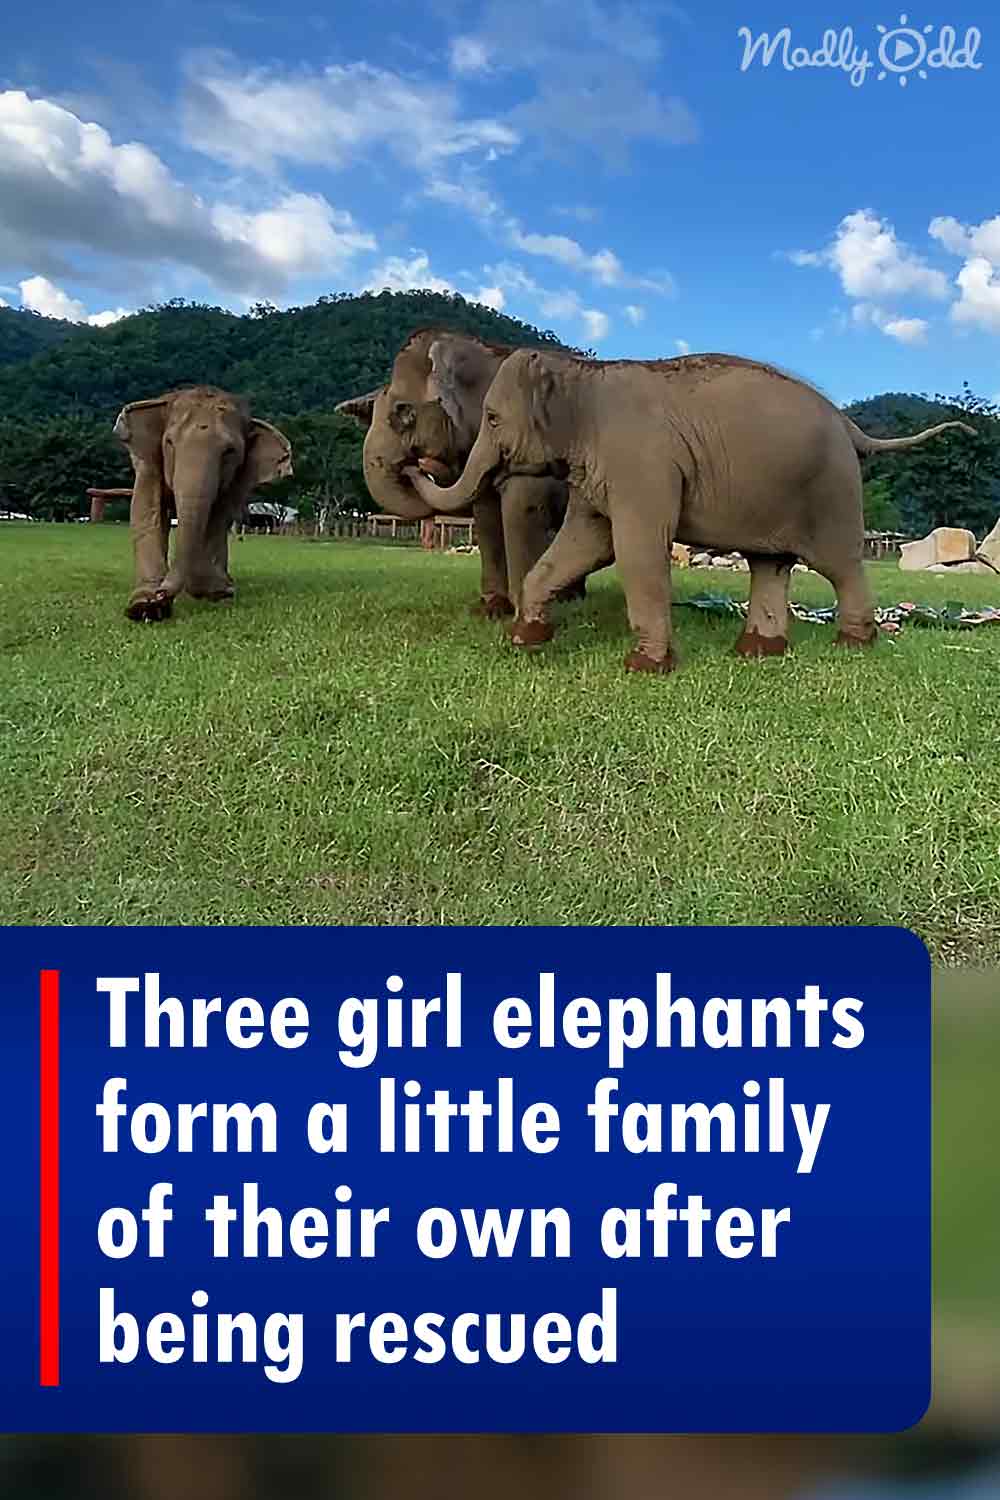 Three girl elephants form a little family of their own after being rescued